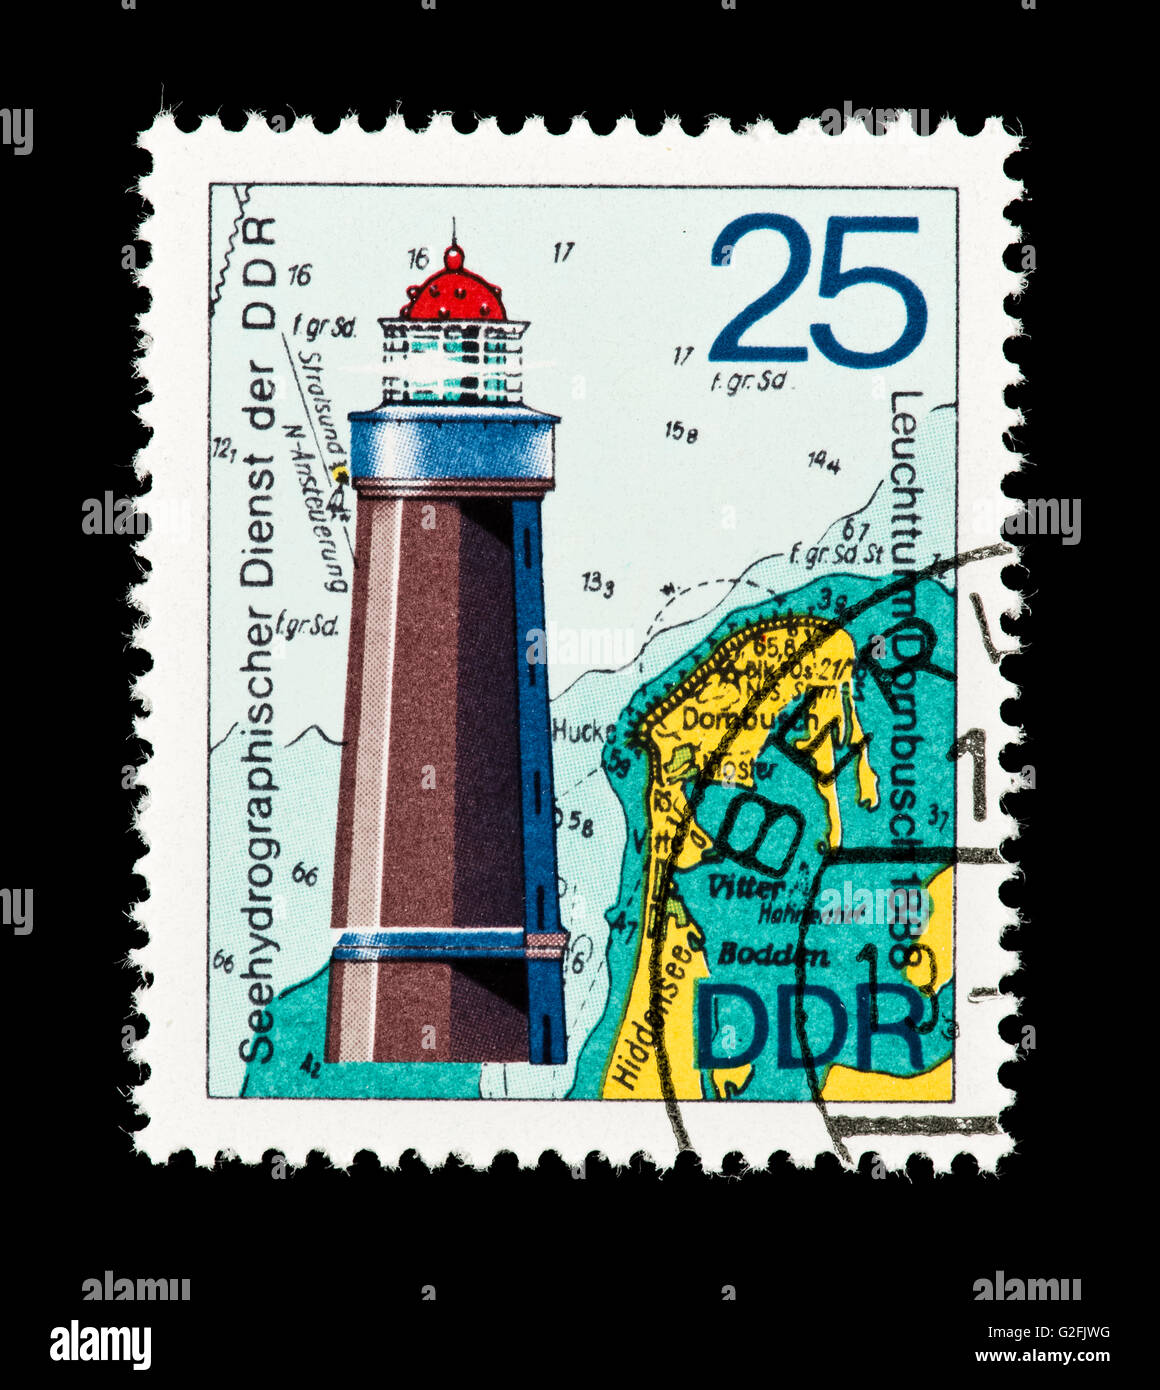 Postage stamp from East Germany (DDR) depicting the Dornbush lighthouse from 1888, hydrographic society of the DDR. Stock Photo